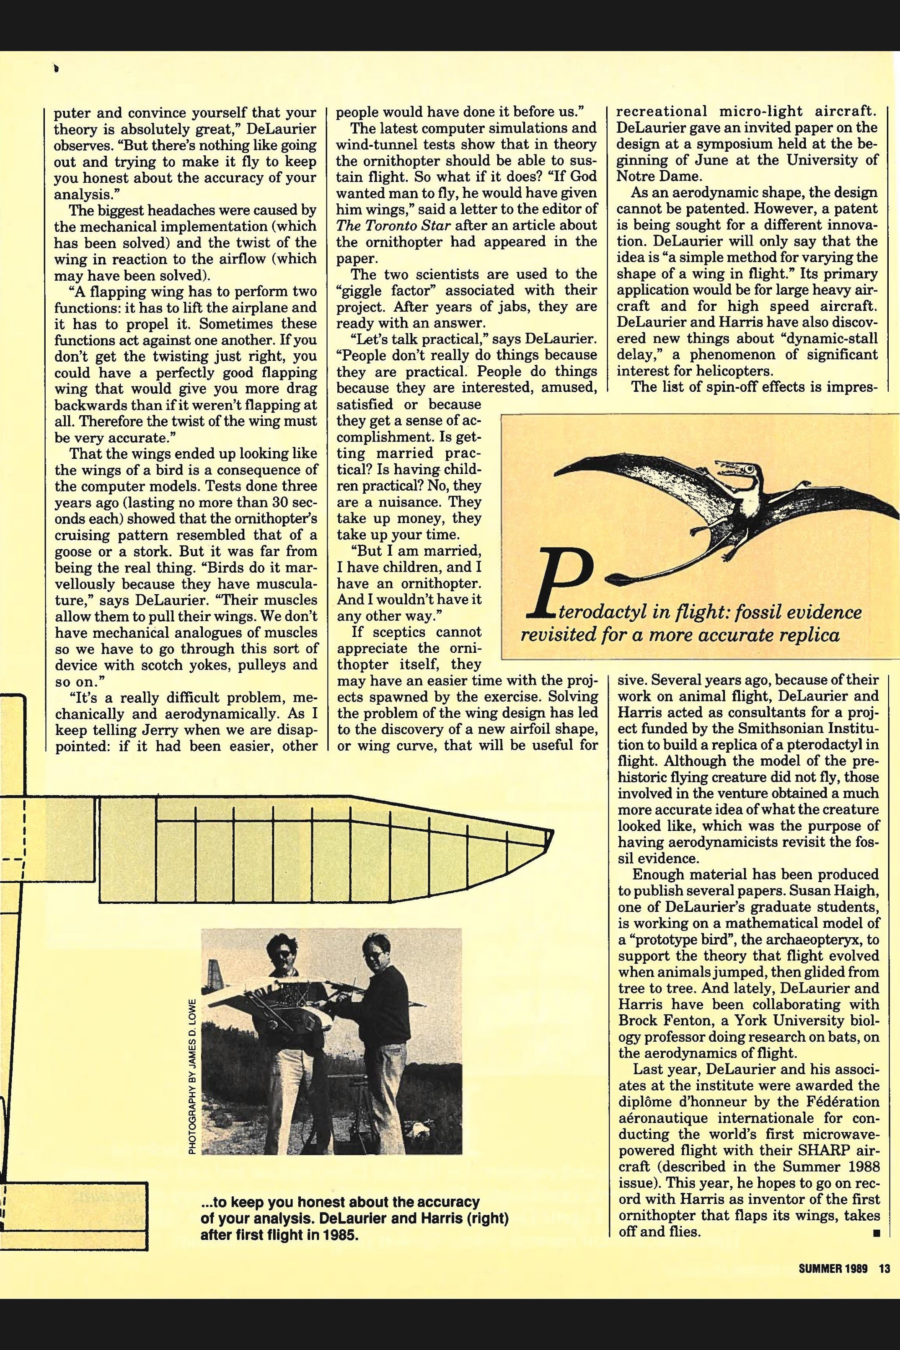 Magazine clipping from University of Toronto Magazine, Summer, 1989
Headline: A Quest for Flapping Wings: Attempting to build a mechanical bird
Byline: Karina Dahlin
Illustration 1: A sketch of the head of a long-bearded, balding Leonardo da Vinci
Caption: da Vinci, too, wondered about flight
Photo 1: A silhouetted picture outside, Professor DeLaurier launching his curve-winged ornithopter into the air with a throw.
Caption: DeLaurier with ornithopter: there’s nothing like going out and trying to make it fly…
Illustration 2: A sketch of a pterodactyl in flight, wings spread wide.
Caption: Pterodactyl in flight: fossil evidence revisited for a more accurate replica
Photo 2: Professors DeLaurier and Harris together hold their ornithopter prototype.
Caption: …to keep you honest about the accuracy of your analysis. DeLaurier and Harris (right) after first flight in 1985.
Illustration 3: Spread across both pages running along the margin is a sketch of the ornithopter’s body, the wings spreading into each page.
The challenge to create a bird-like device that will flap its wings, take off and fly has fascinated James DeLaurier and Jeremy Harris for 20 years. A test flight this month will show if their ornithopter can fly. DeLaurier, a professor at the Institute for Aerospace Studies at the University of Toronto, and Harris, principal research engineer at Battelle Memorial Institute in Columbus, Ohio, have spent $6,000 on their project and thousands of hours. Their work is an illustration of how much fun academic research can be when take it seriously. “You know how science goes,” DeLaurier says. “You work on the darndest things. If you go into it with an open enough mind and go deep enough you start discovering things that can have spin-offs with practical applications.”
Ornithopters (ornitho: birdlike, pter: wing) have existed for a long time but only in the imagination of man. None has been built that would stay up in the air. Leonardo da Vinci is considered to be the first person who seriously attempted to define what a flapping-wing human-carrying vehicle would look like. “He realized that human power was not sufficient to allow it to fly,” says DeLaurier.
The DeLaurier/Harris ornithopter weighs three kilograms and has a wing-span of three metres. It is built of wood, fiberglass, carbon fibers, aluminum and steel with a covering of fiber-reinforced plastic sheets. Remotely controlled, it is not designed to carry people. A 1.6 horsepower model airplane engine provides the power to drive a system of pulleys and belts that make a centre panel in the middle of the fuselage move up and down. The wings, connected to the centre panel, are pivoted on outboard struts and driven by the panel’s motion.
The two scientists went from theoretical analyses and sophisticated computer models to practical tests. The biggest headaches were caused by the mechanical implementation and the twist of the wing in reaction to the airflow. “A flapping wing has to perform two functions: it has to lift the airplane and it has to propel it. Sometimes these functions act against one another. If you don’t get the twisting just right, you could have a perfectly good flapping wing that would give you more drag backwards than if it weren’t flapping at all.”
Computer models dictated that the wings would look the wings of a bird. Tests done three years ago showed that the ornithopter’s cruising pattern resembled that of a goose or a stork. “Birds do it marvelously because they have musculature,” says DeLaurier. “Their muscles allow them to pull their wings. We don’t have mechanical analogues of muscles so we have to go through this sort of device with scotch yokes, pulleys and so on.”
The two have faced skepticism and humorous jabs throughout their work. “People don’t really do things because they are practical,” De Laurier says. “People do things because they are interested, amused, satisfied or because they get a sense of accomplishment.” While sceptics may not appreciate the ornithopter project, they may have an easier time with its results. Solving the problem of the wing design has led to the discovery of a new airfoil shape, or wing curve, that will be useful for recreational micro-light aircraft. The two are also seeking a patent for “a simple method for varying the shape of a wing in flight,” which would have applications for large heavy aircraft and for high speed aircraft. DeLaurier and Harris have also discovered new things about “dynamic-stall delay,” a phenomenon of significant interest for helicopters.
Because of their work on animal flight, DeLaurier and Harris acted as consultants for a project funded by the Smithsonian Institute to build a replica of a pterodactyl in flight. Although the model of the prehistoric flying creature did not fly, those involved in the venture obtained a more accurate idea of what the creature looked like. Enough material has been produced to publish several papers. Susan Haigh, one of DeLaurier’s graduate students, is working on a mathematical model of a “prototype bird,” the archaeopteryx, to support the theory that flight evolved when animals jumped, then glided from tree to tree. 
Last year, DeLaurier and his associates at the institute were awarded the diplôme d’honneur by the Fédération aéronautique internationale for conducting the world’s first microwave-powered flight with their SHARP aircraft. This year, he hopes to go on record with Harris as the inventor of the first ornithopter that flaps its wings, takes off and flies.